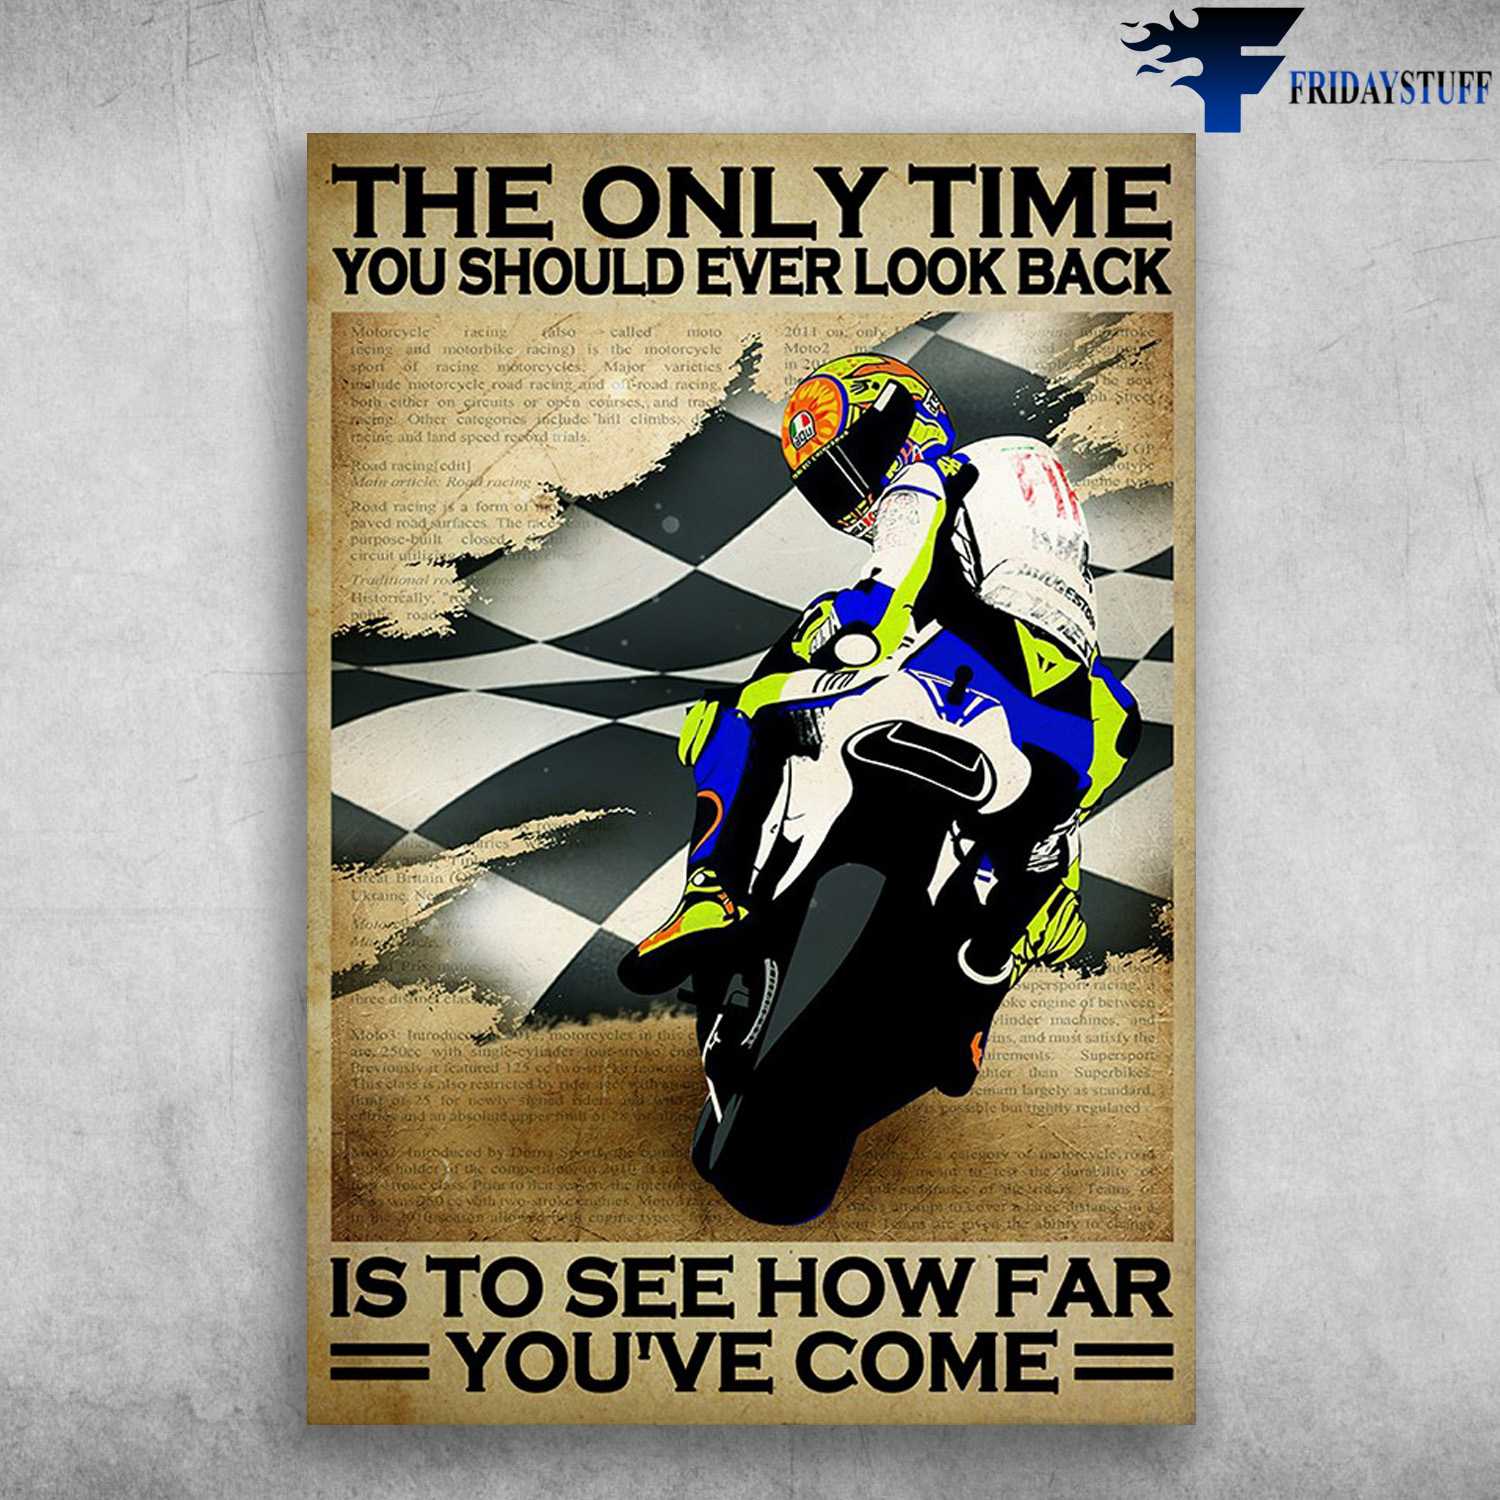 Motocycle Racer, Biker Lover - The Only Time, You Should Ever Look Back, Is To See How Far You've Come